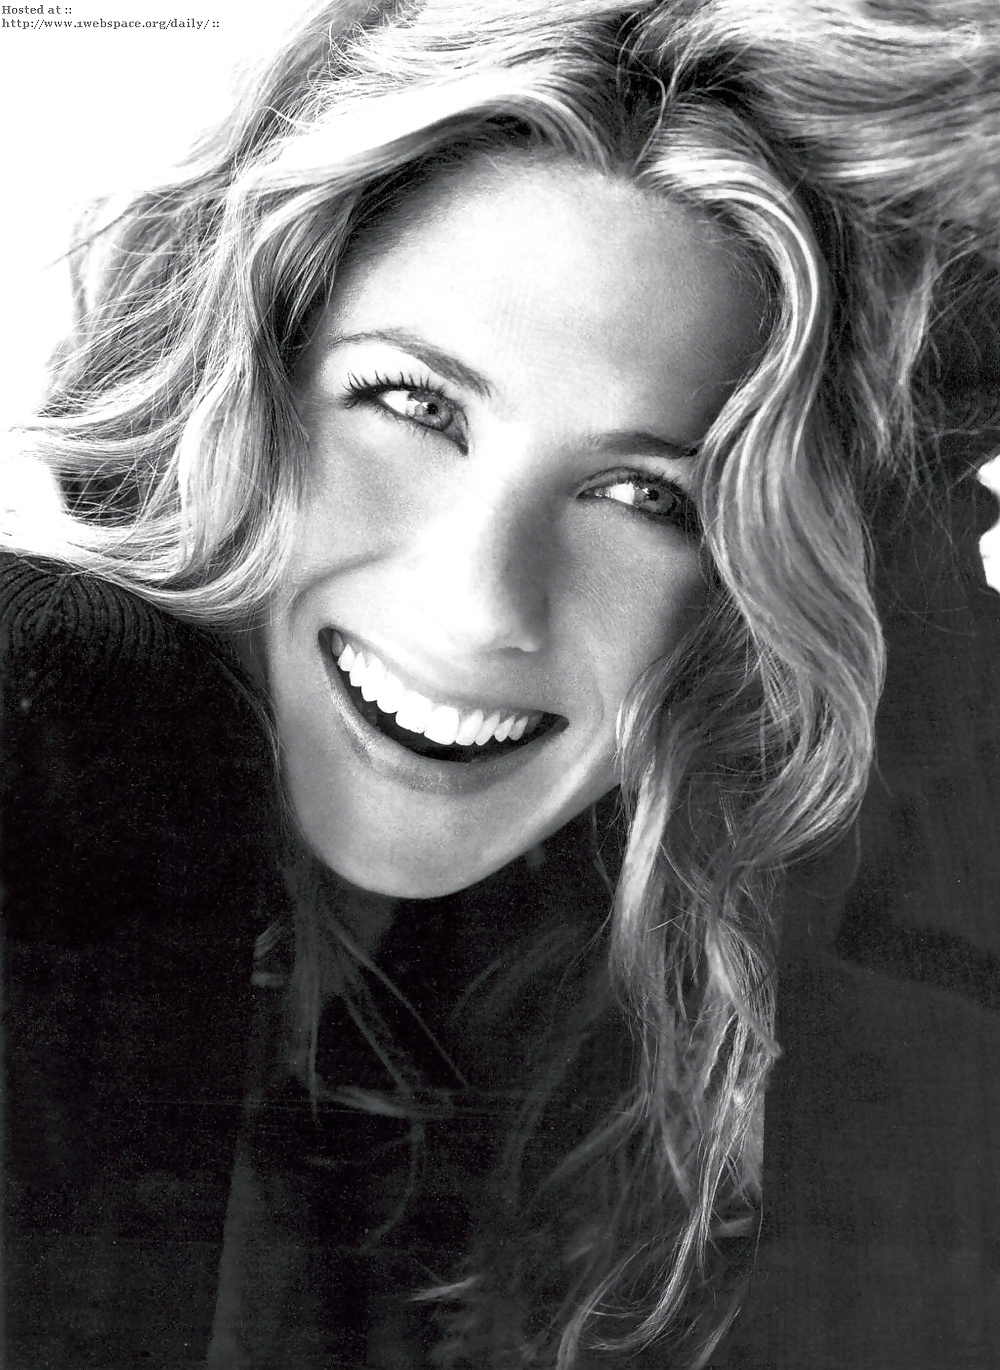 Jennifer Aniston Throughout The Years HQ Part 2 of 2 (CCM) #29056779